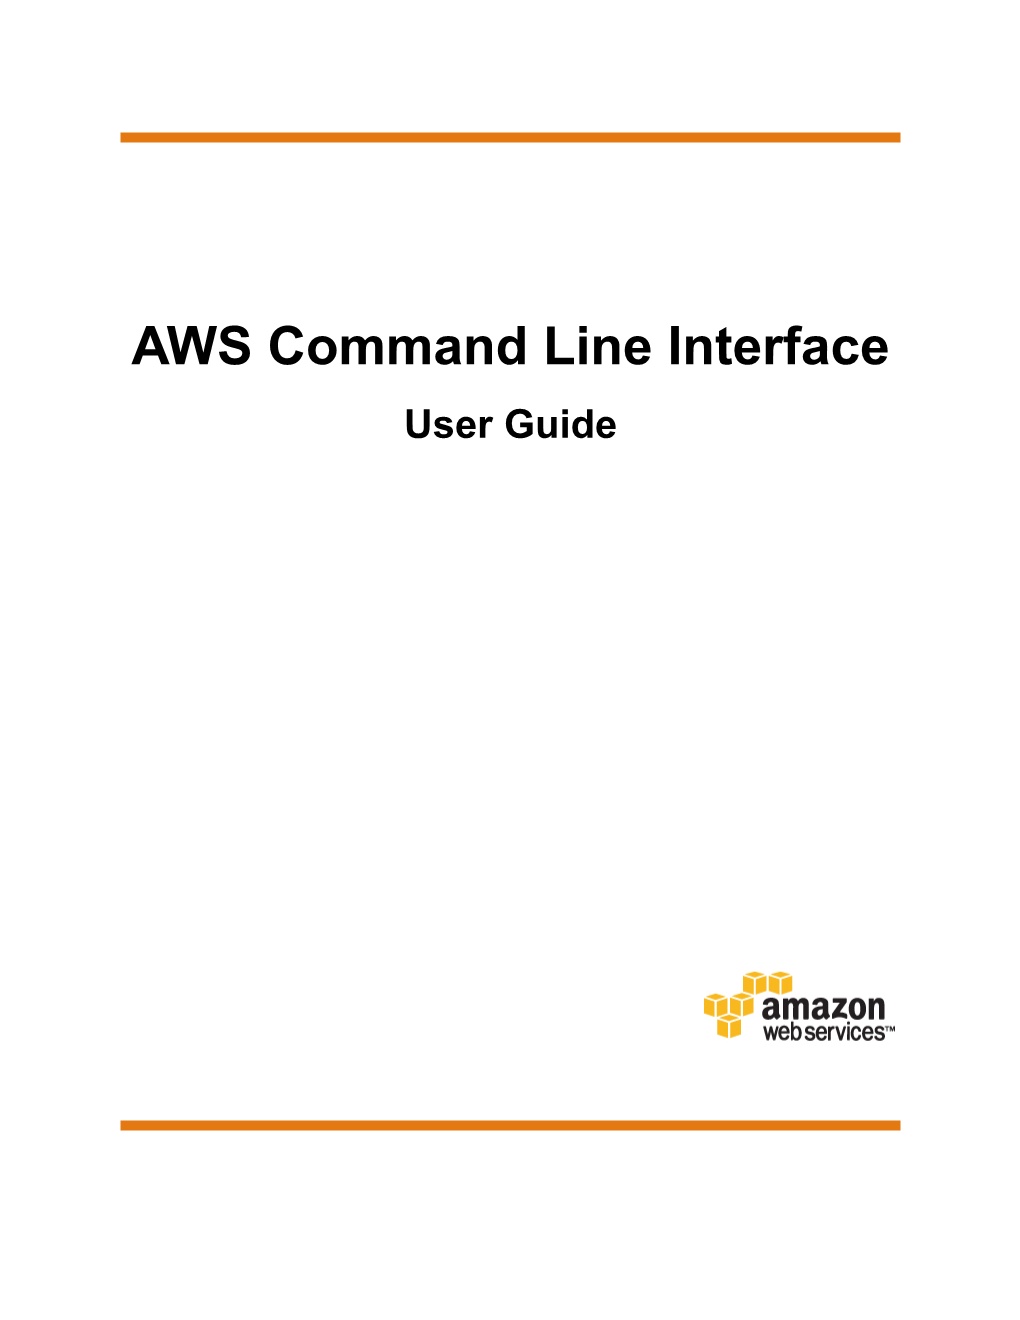 AWS Command Line Interface User Guide AWS Command Line Interface User Guide